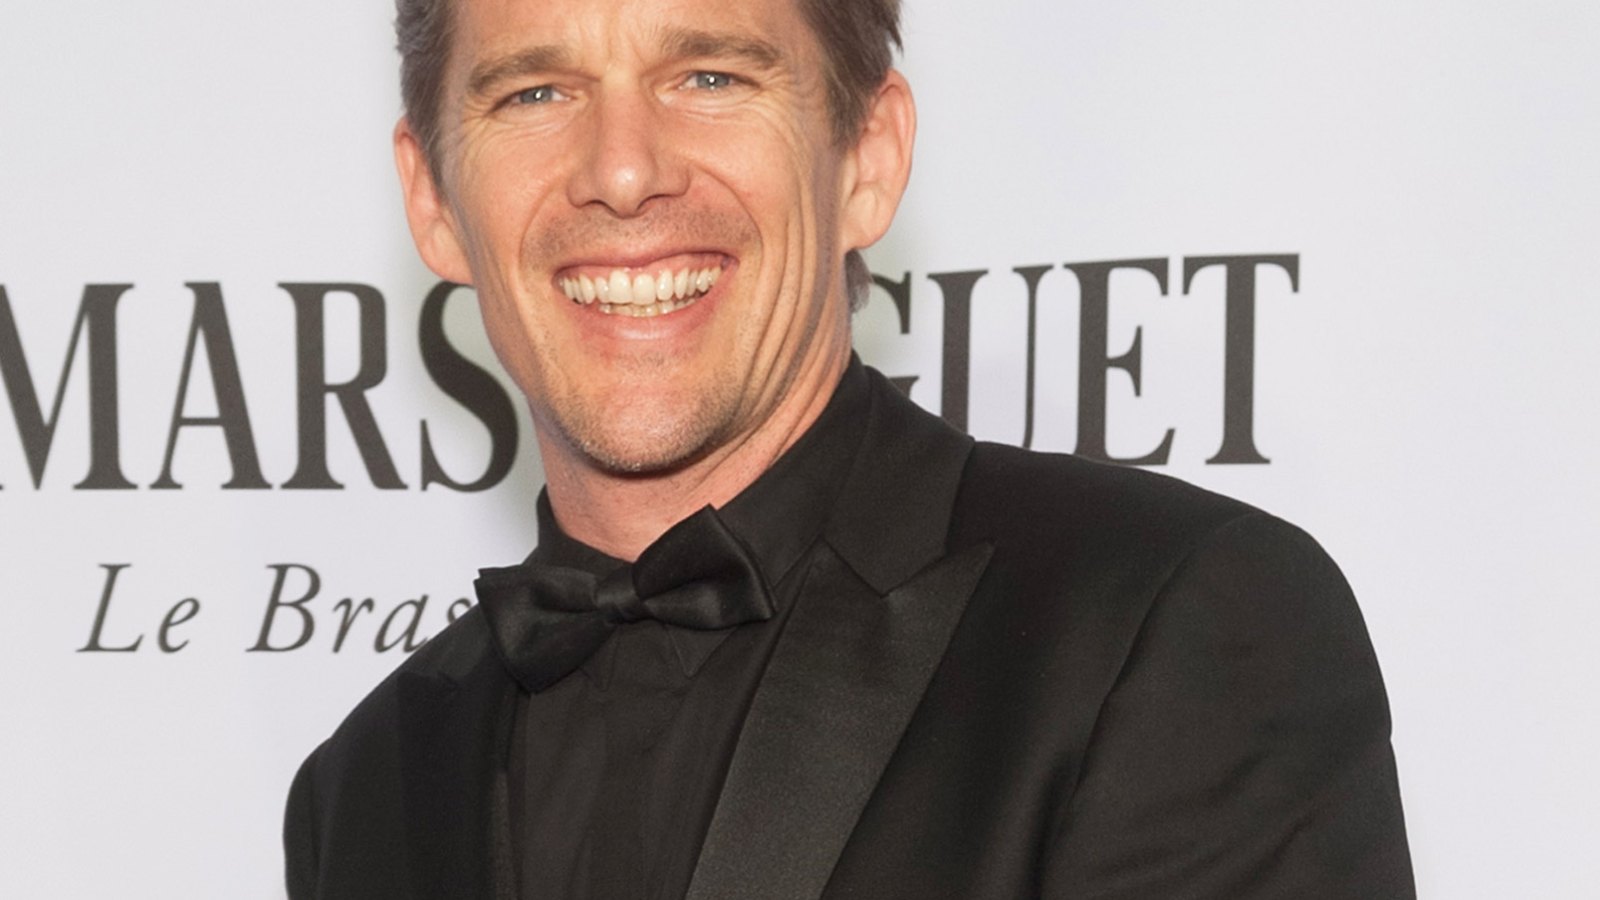 Ethan Hawke shares 25 things you don't know about him with Us Weekly.